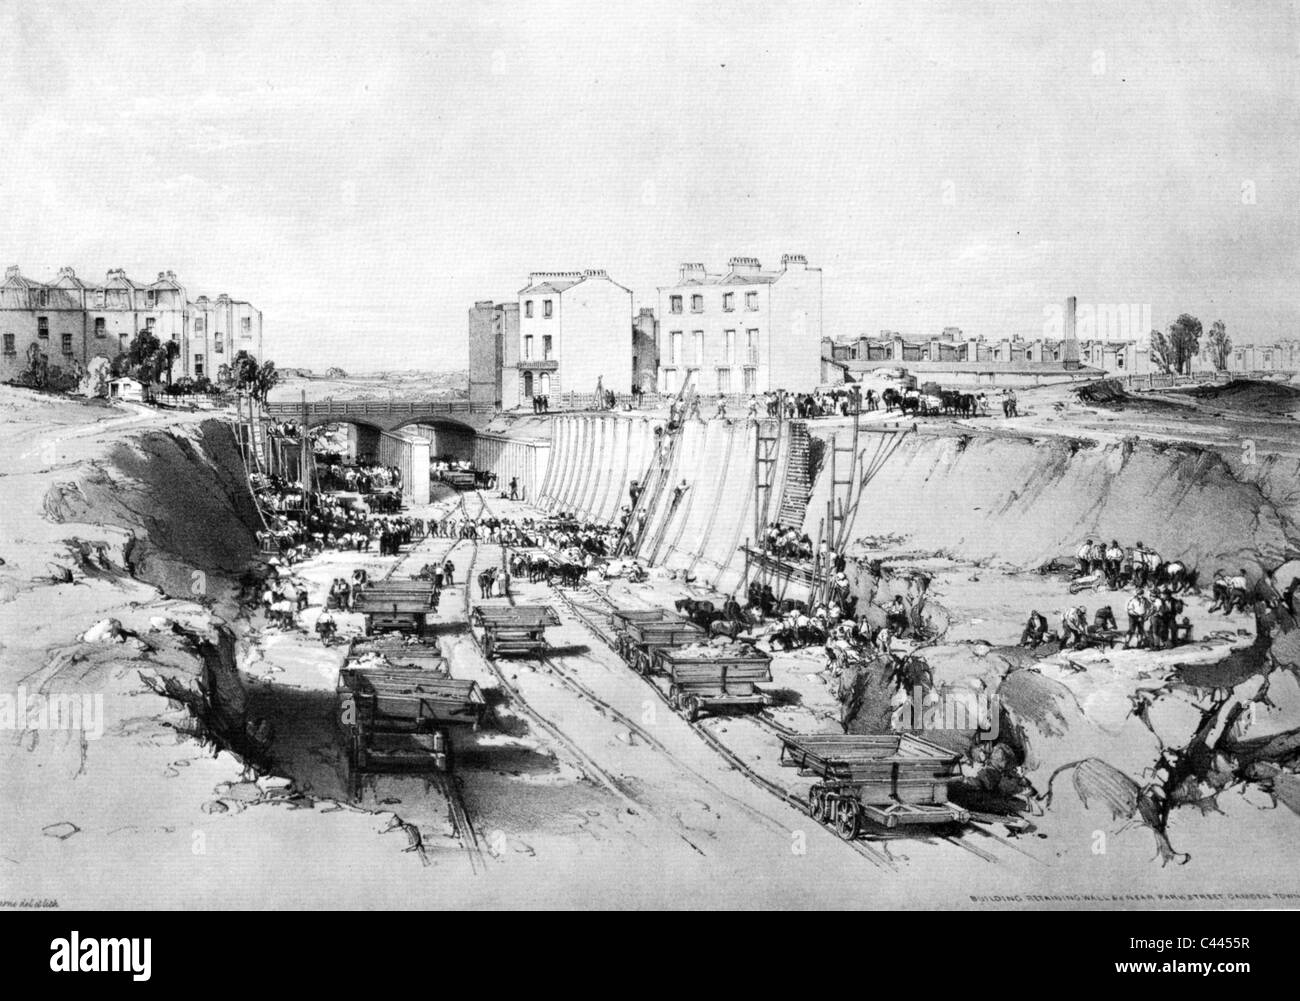 CAMDEN TOWN CUTTING on the London to Birmingham railway under construction in 1839 Stock Photo